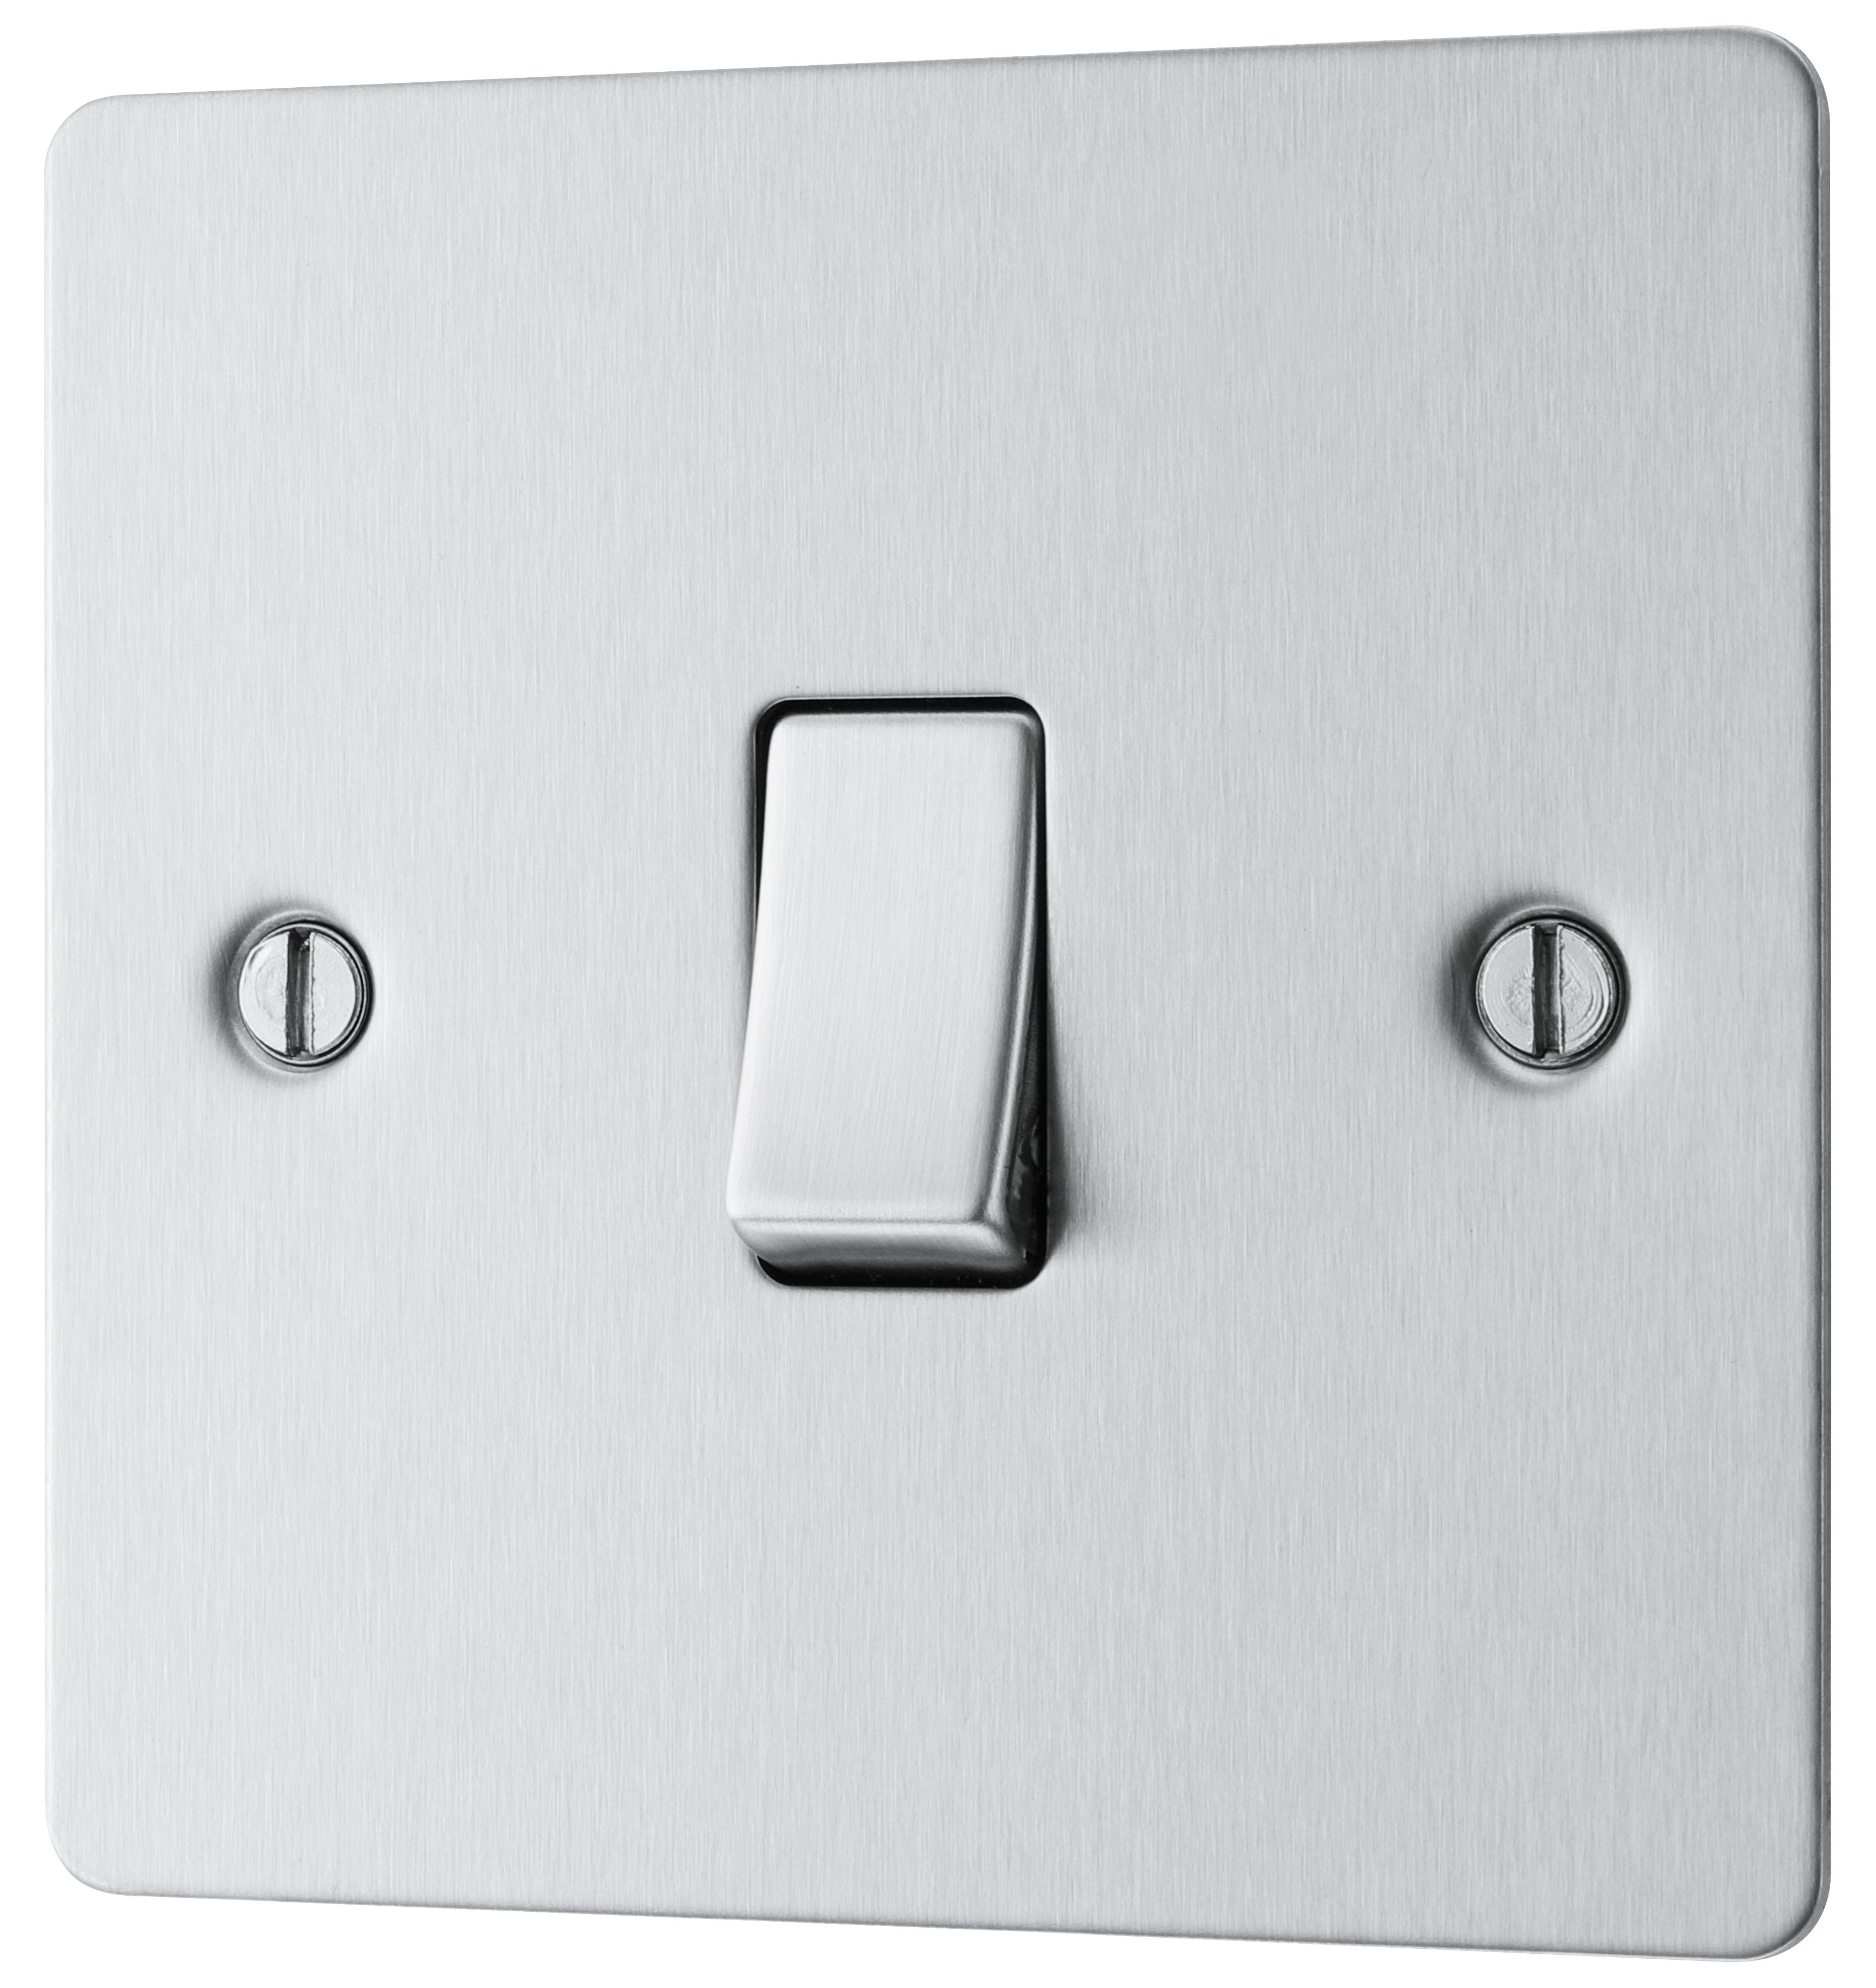 BG Brushed Steel 20A 2 way 1 gang Light Switch with Without LED indicator